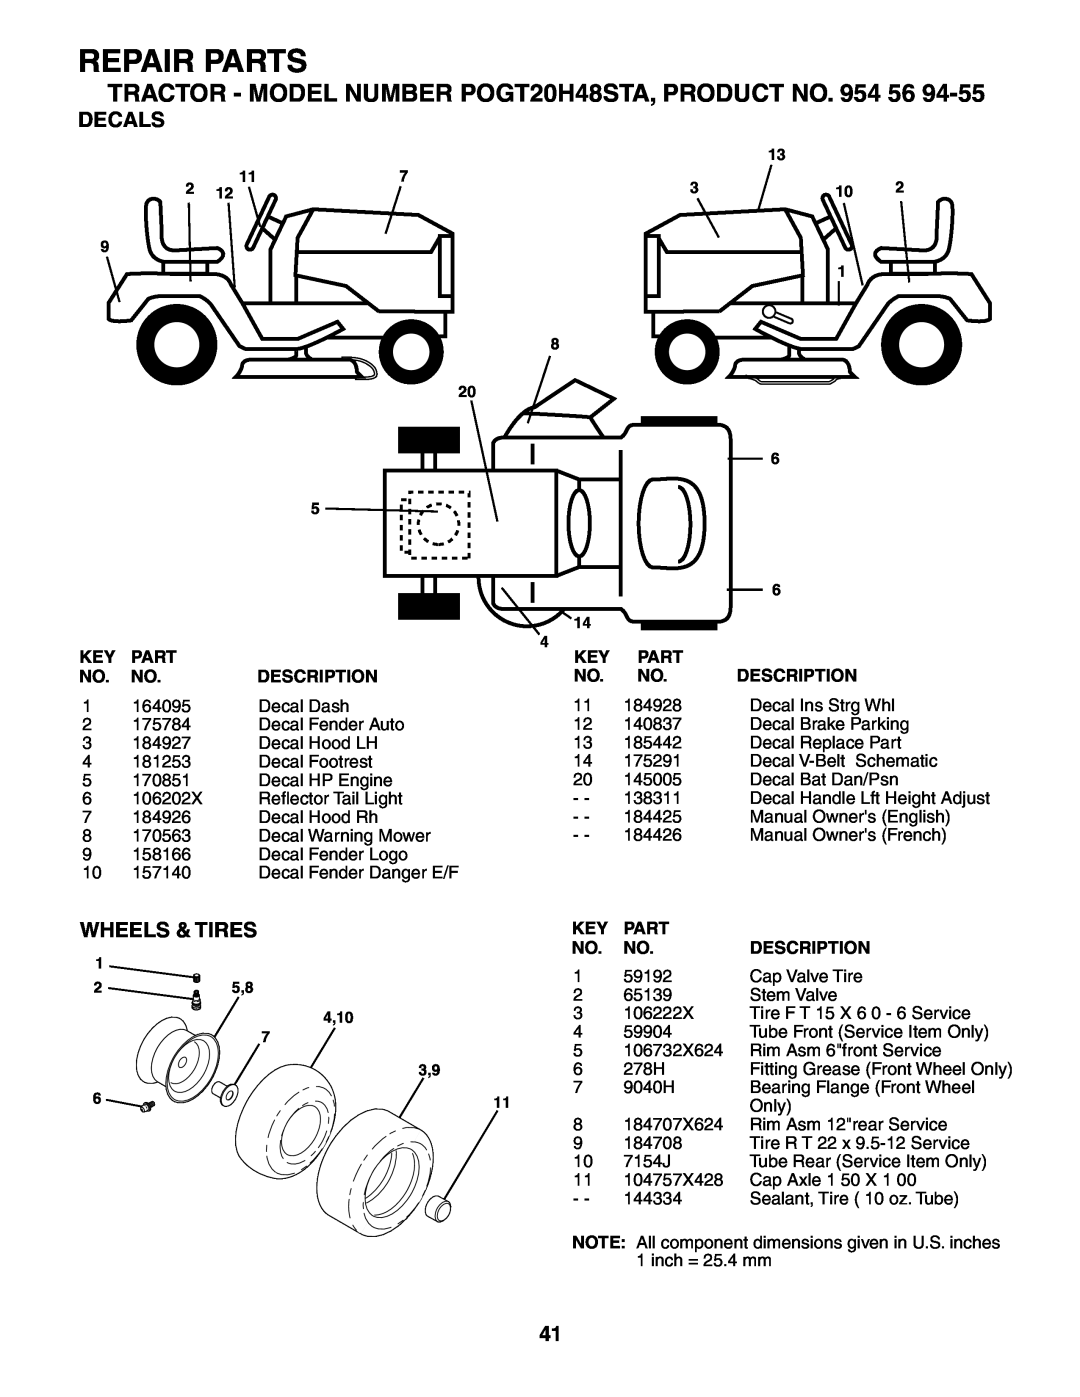 Poulan manual Decals, Wheels & Tires, Repair Parts, TRACTOR - MODEL NUMBER POGT20H48STA, PRODUCT NO. 954 